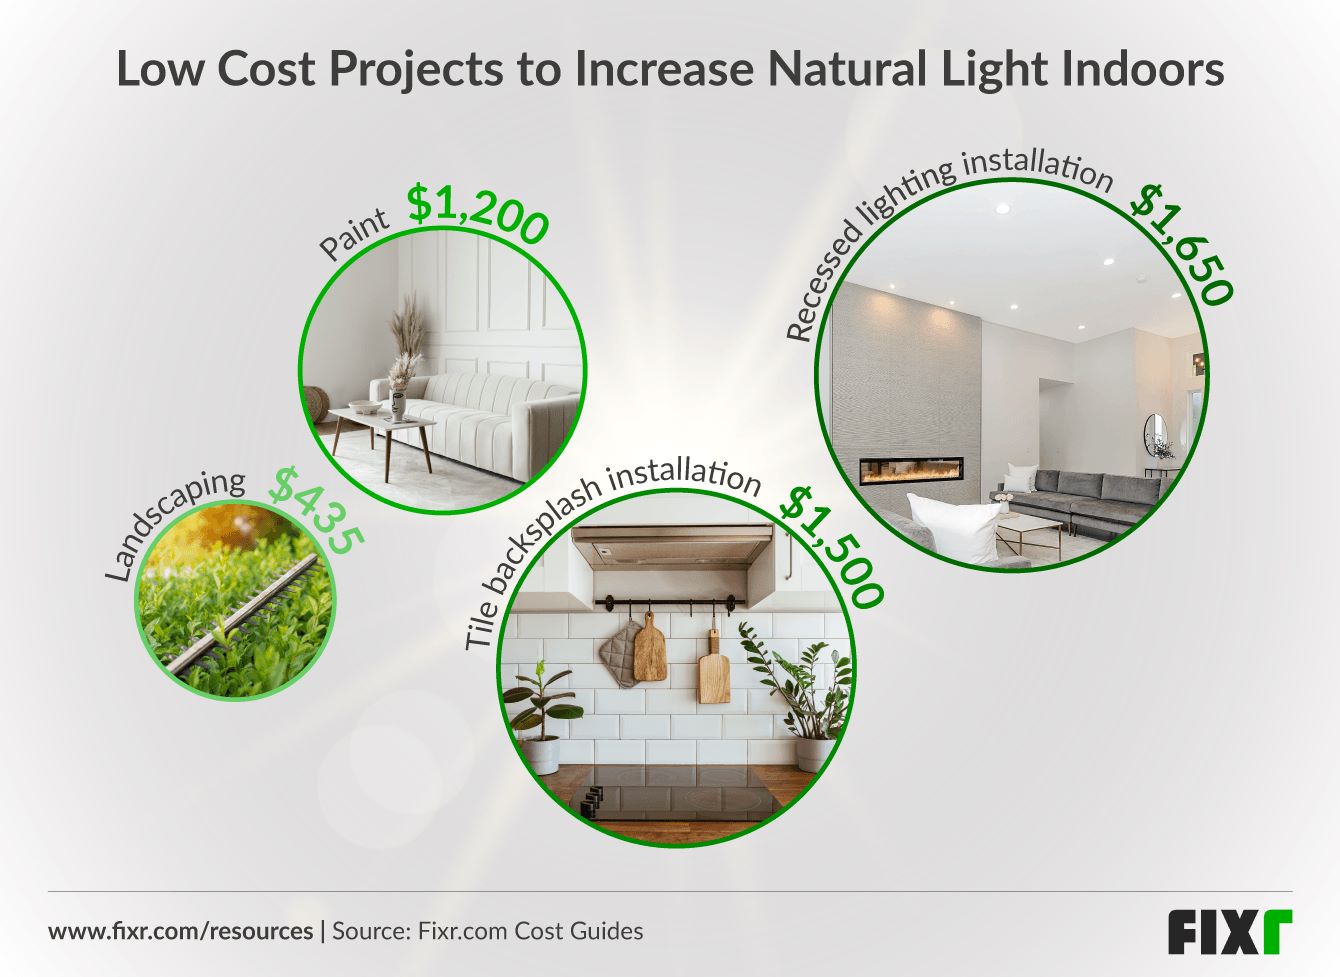 4 Low cost projects to increase natural light indoors